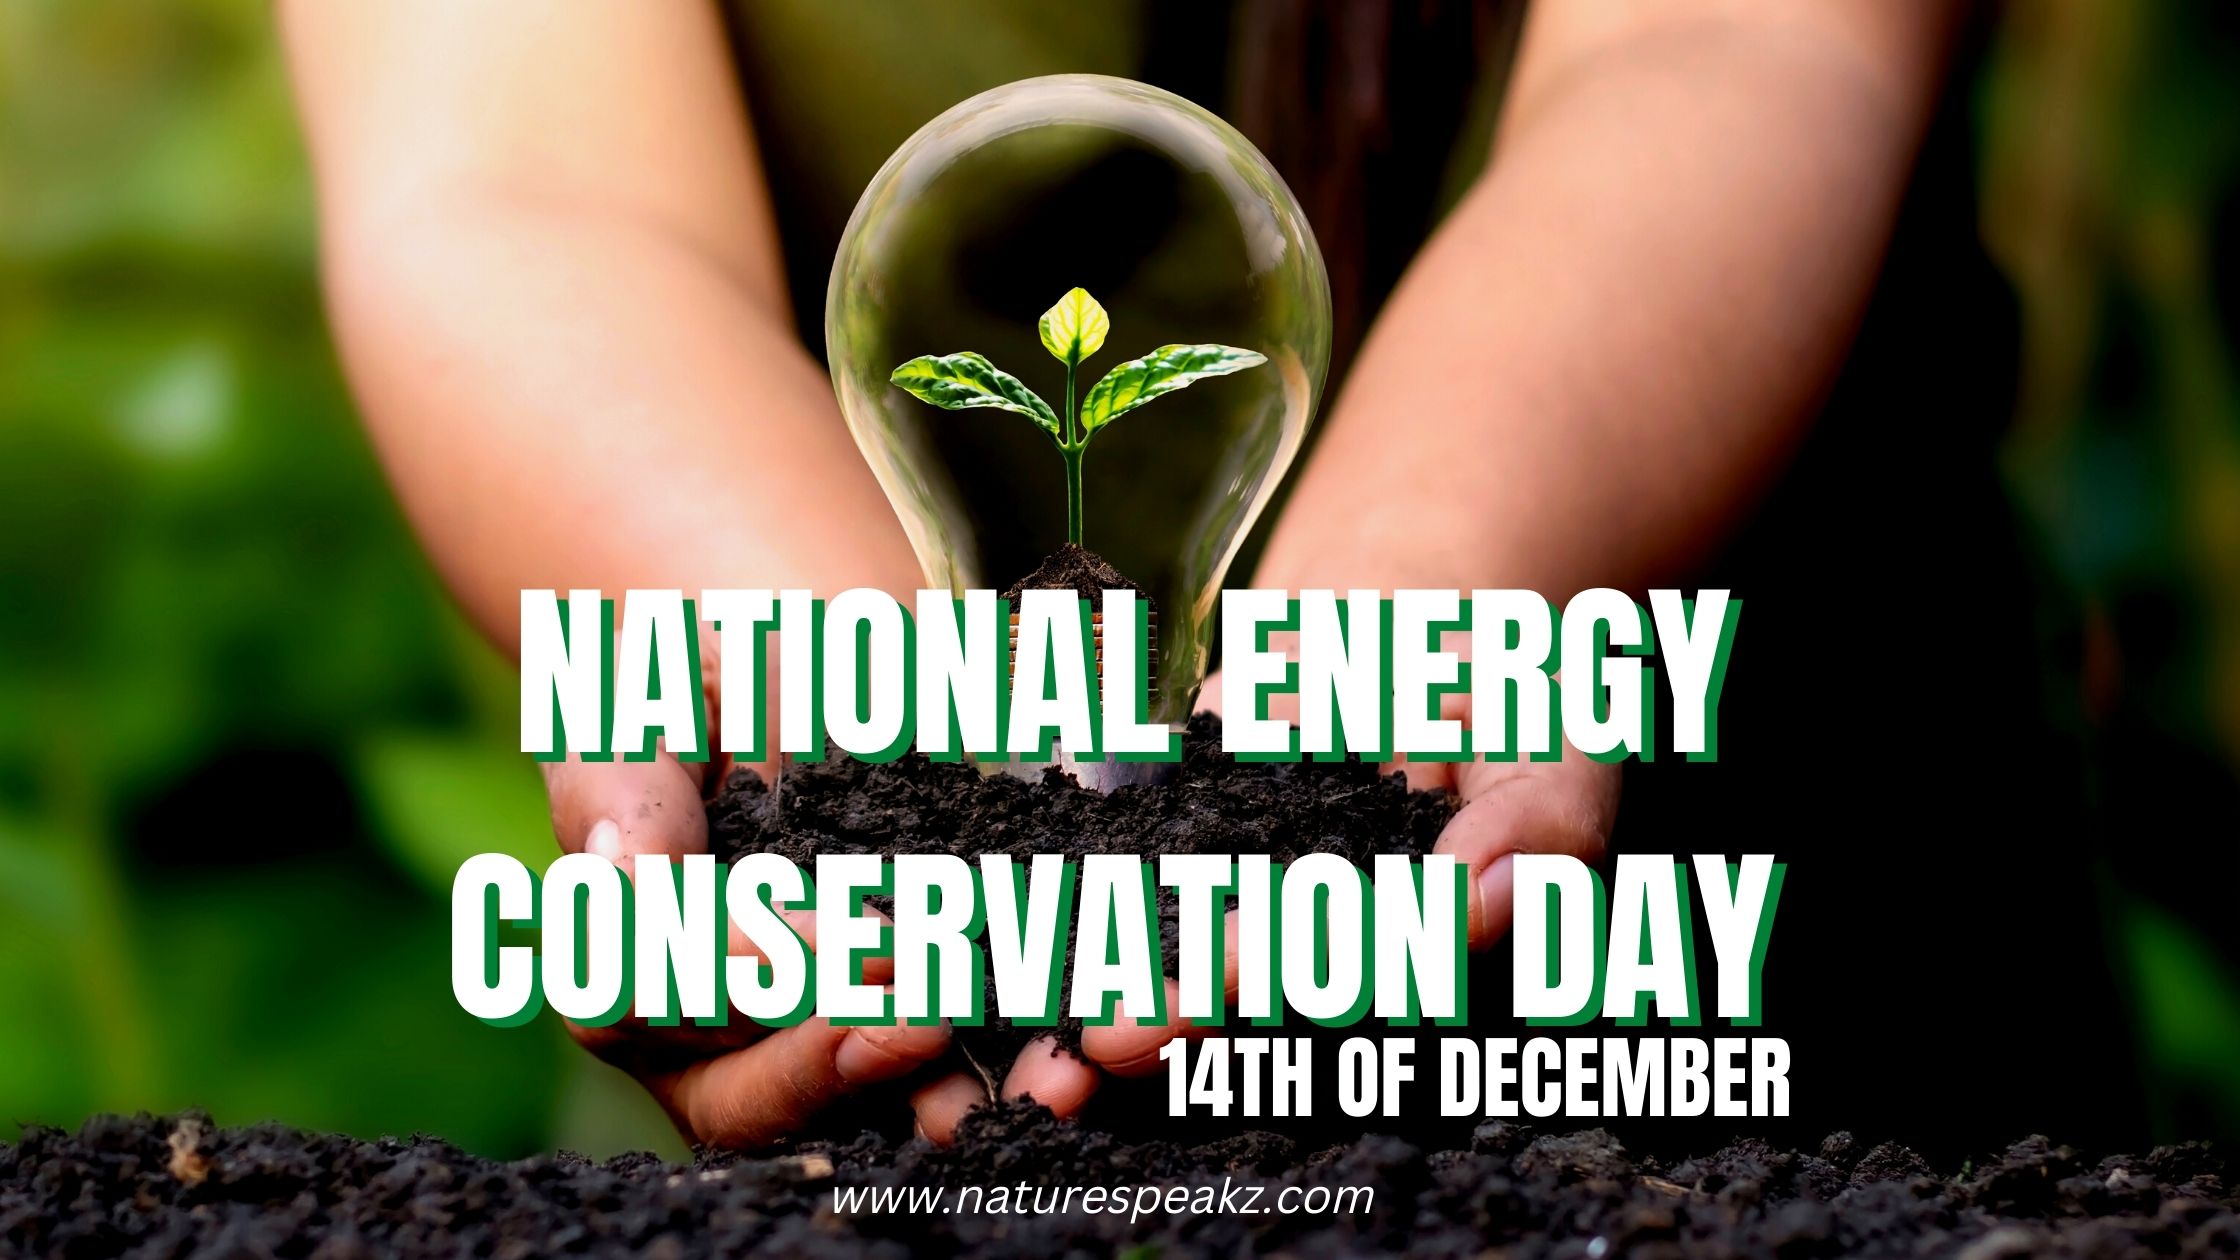 National Energy Conservation Day